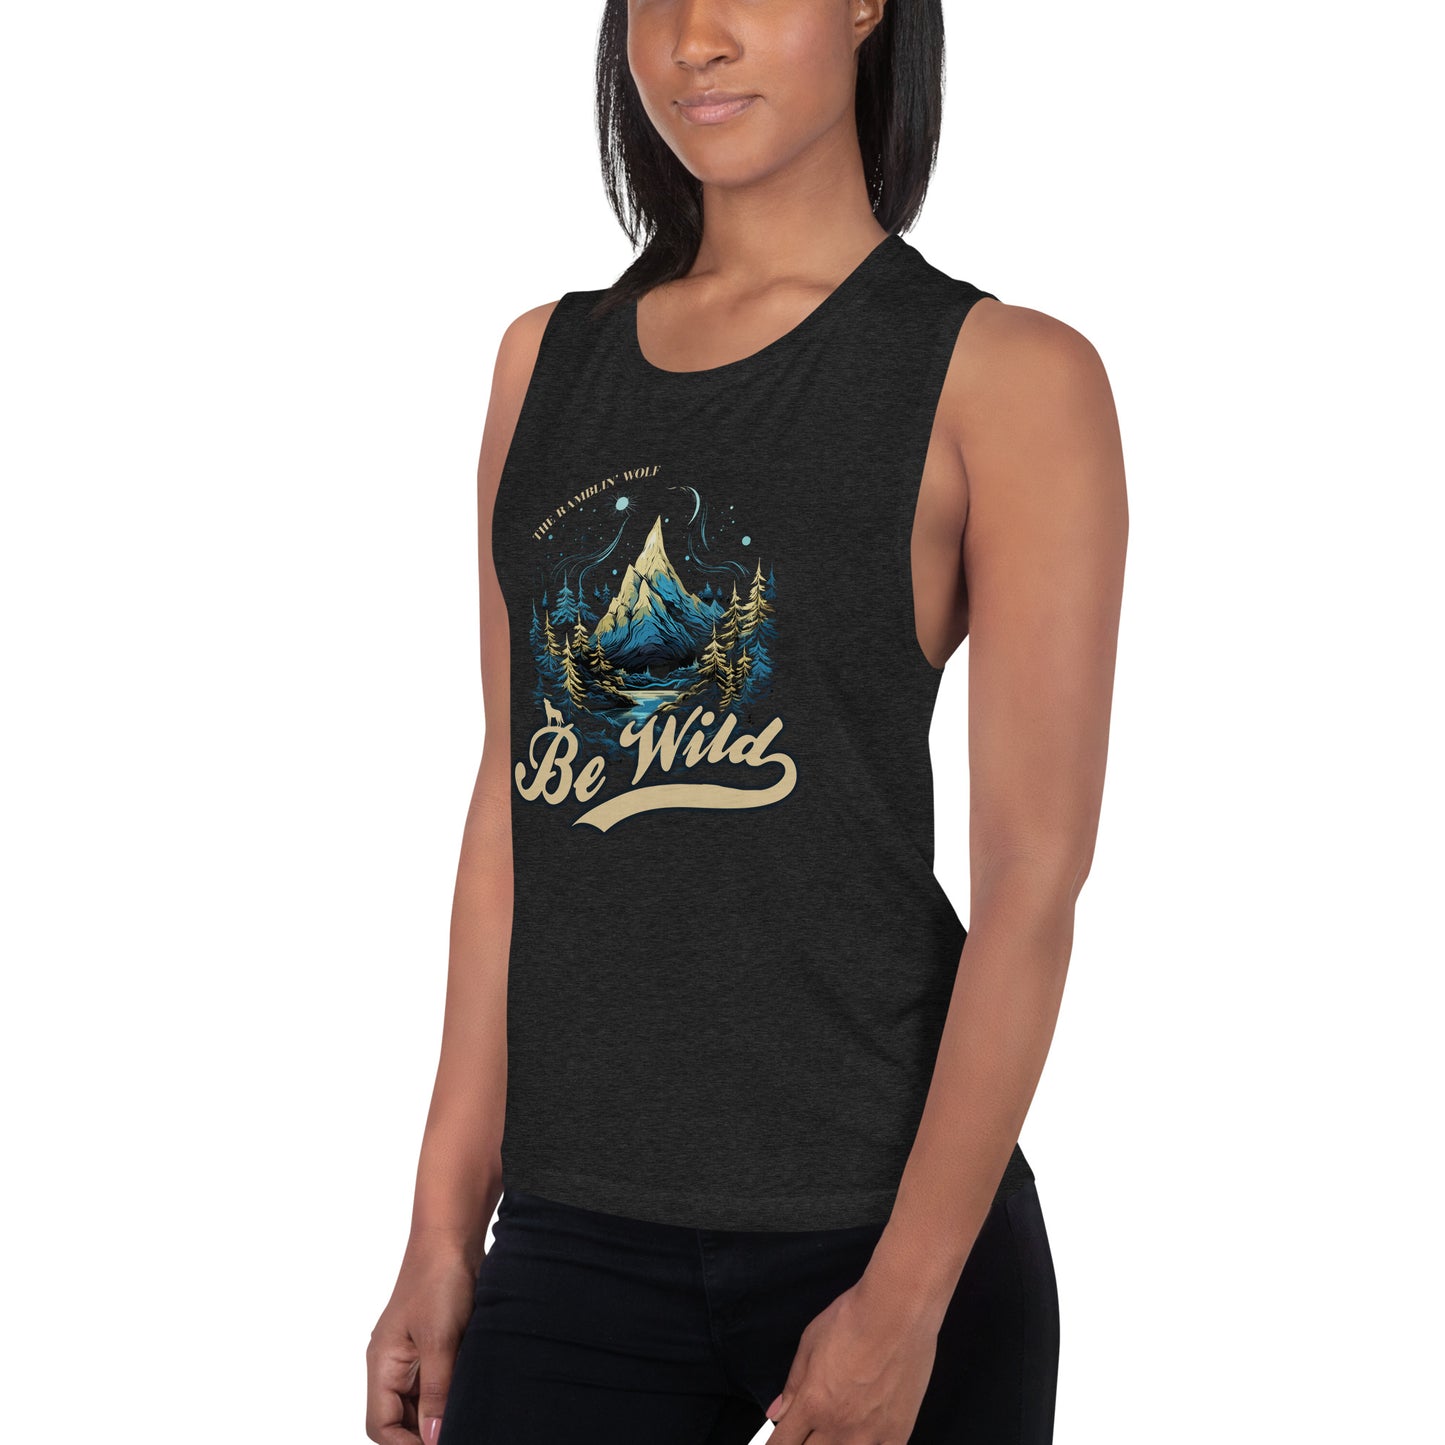 Be Wild Muscle Tank